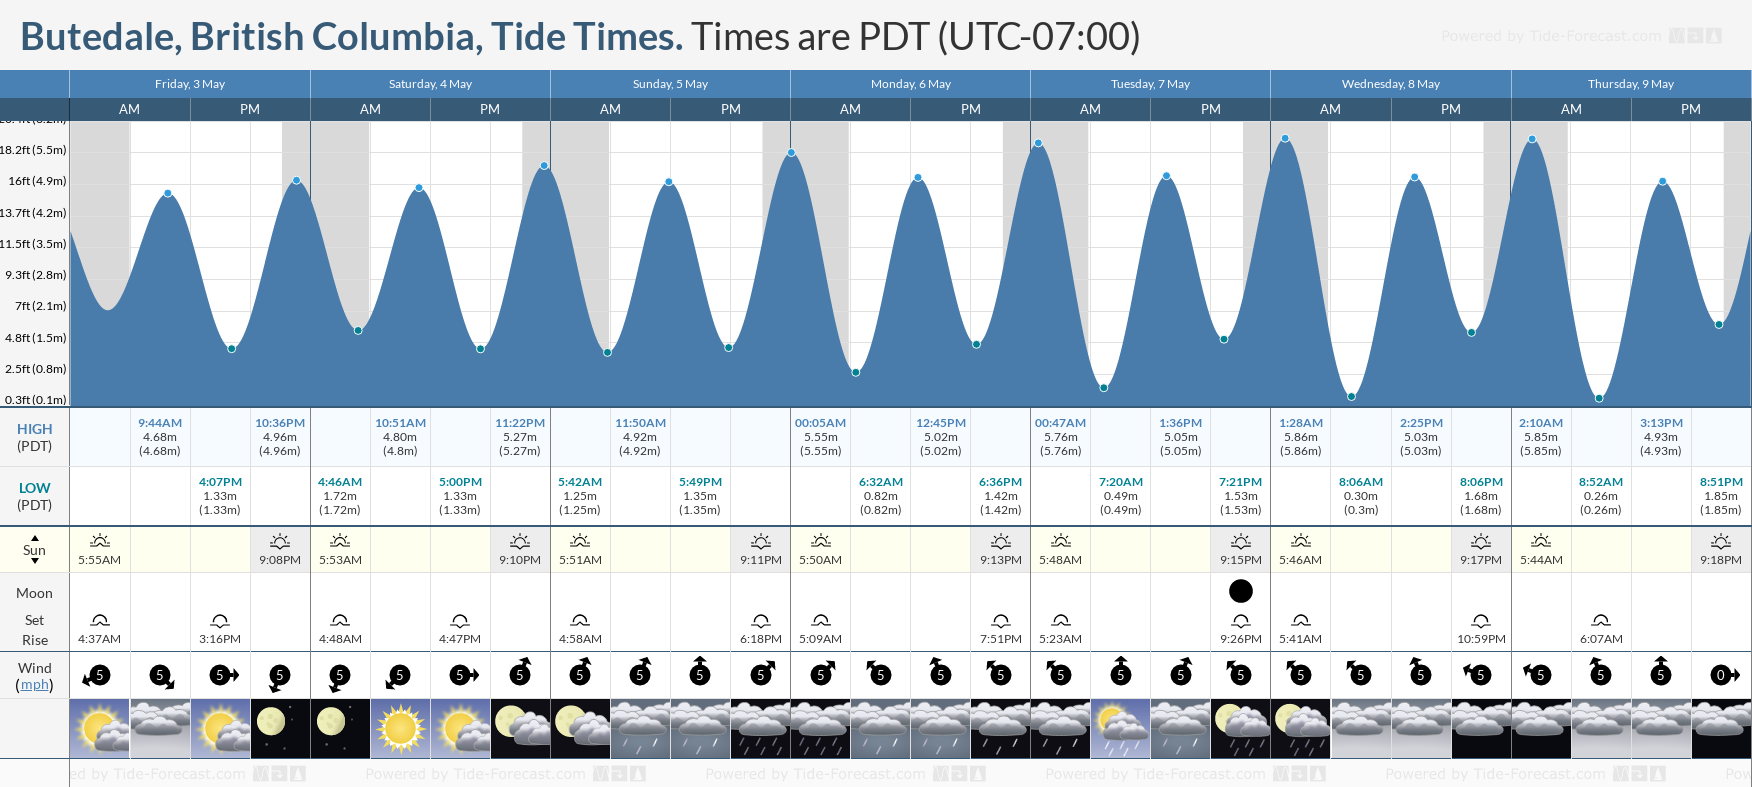 Butedale, British Columbia Tide Chart including high and low tide times for the next 7 days